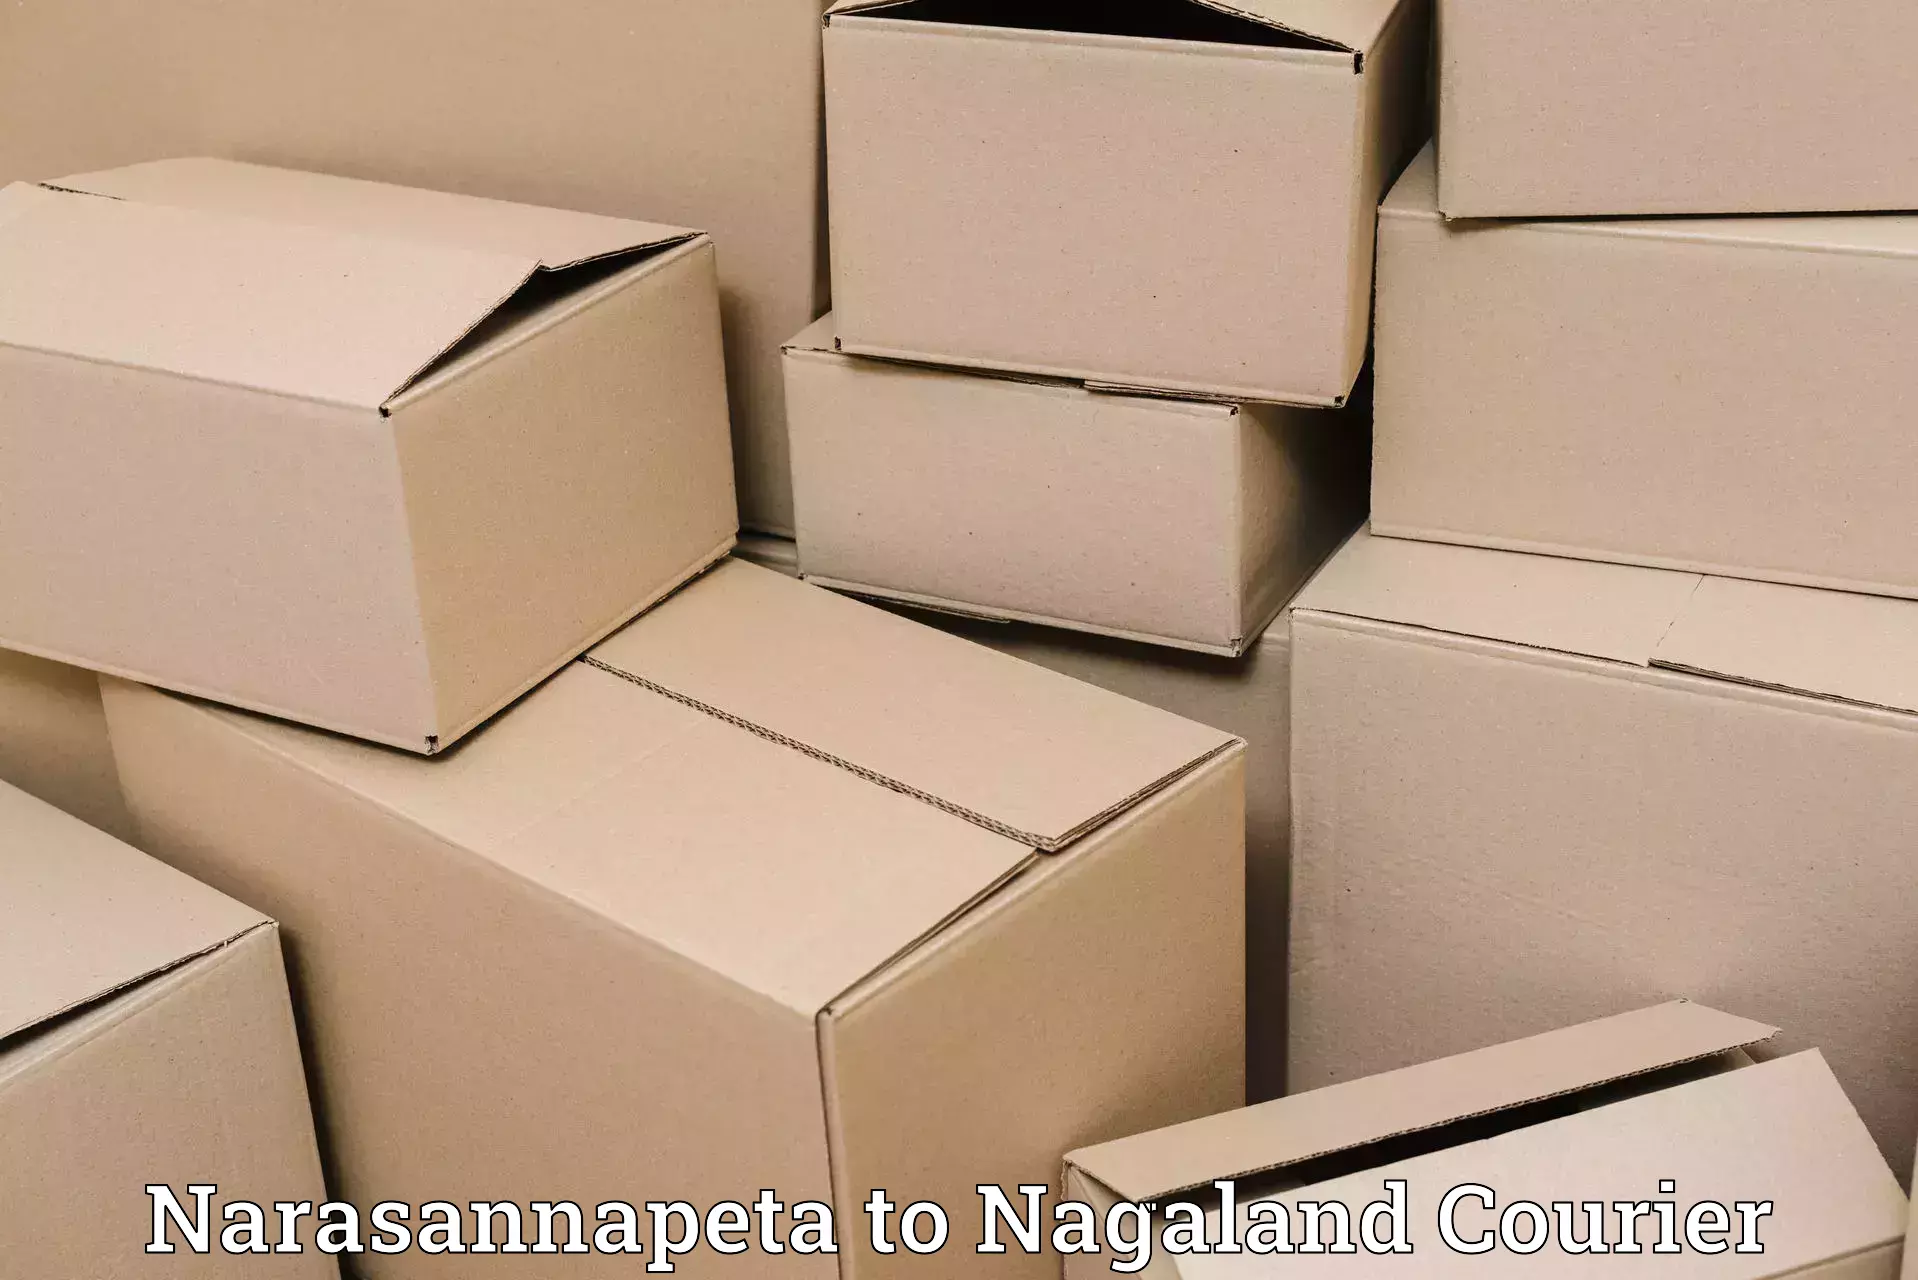 Expedited parcel delivery in Narasannapeta to Nagaland